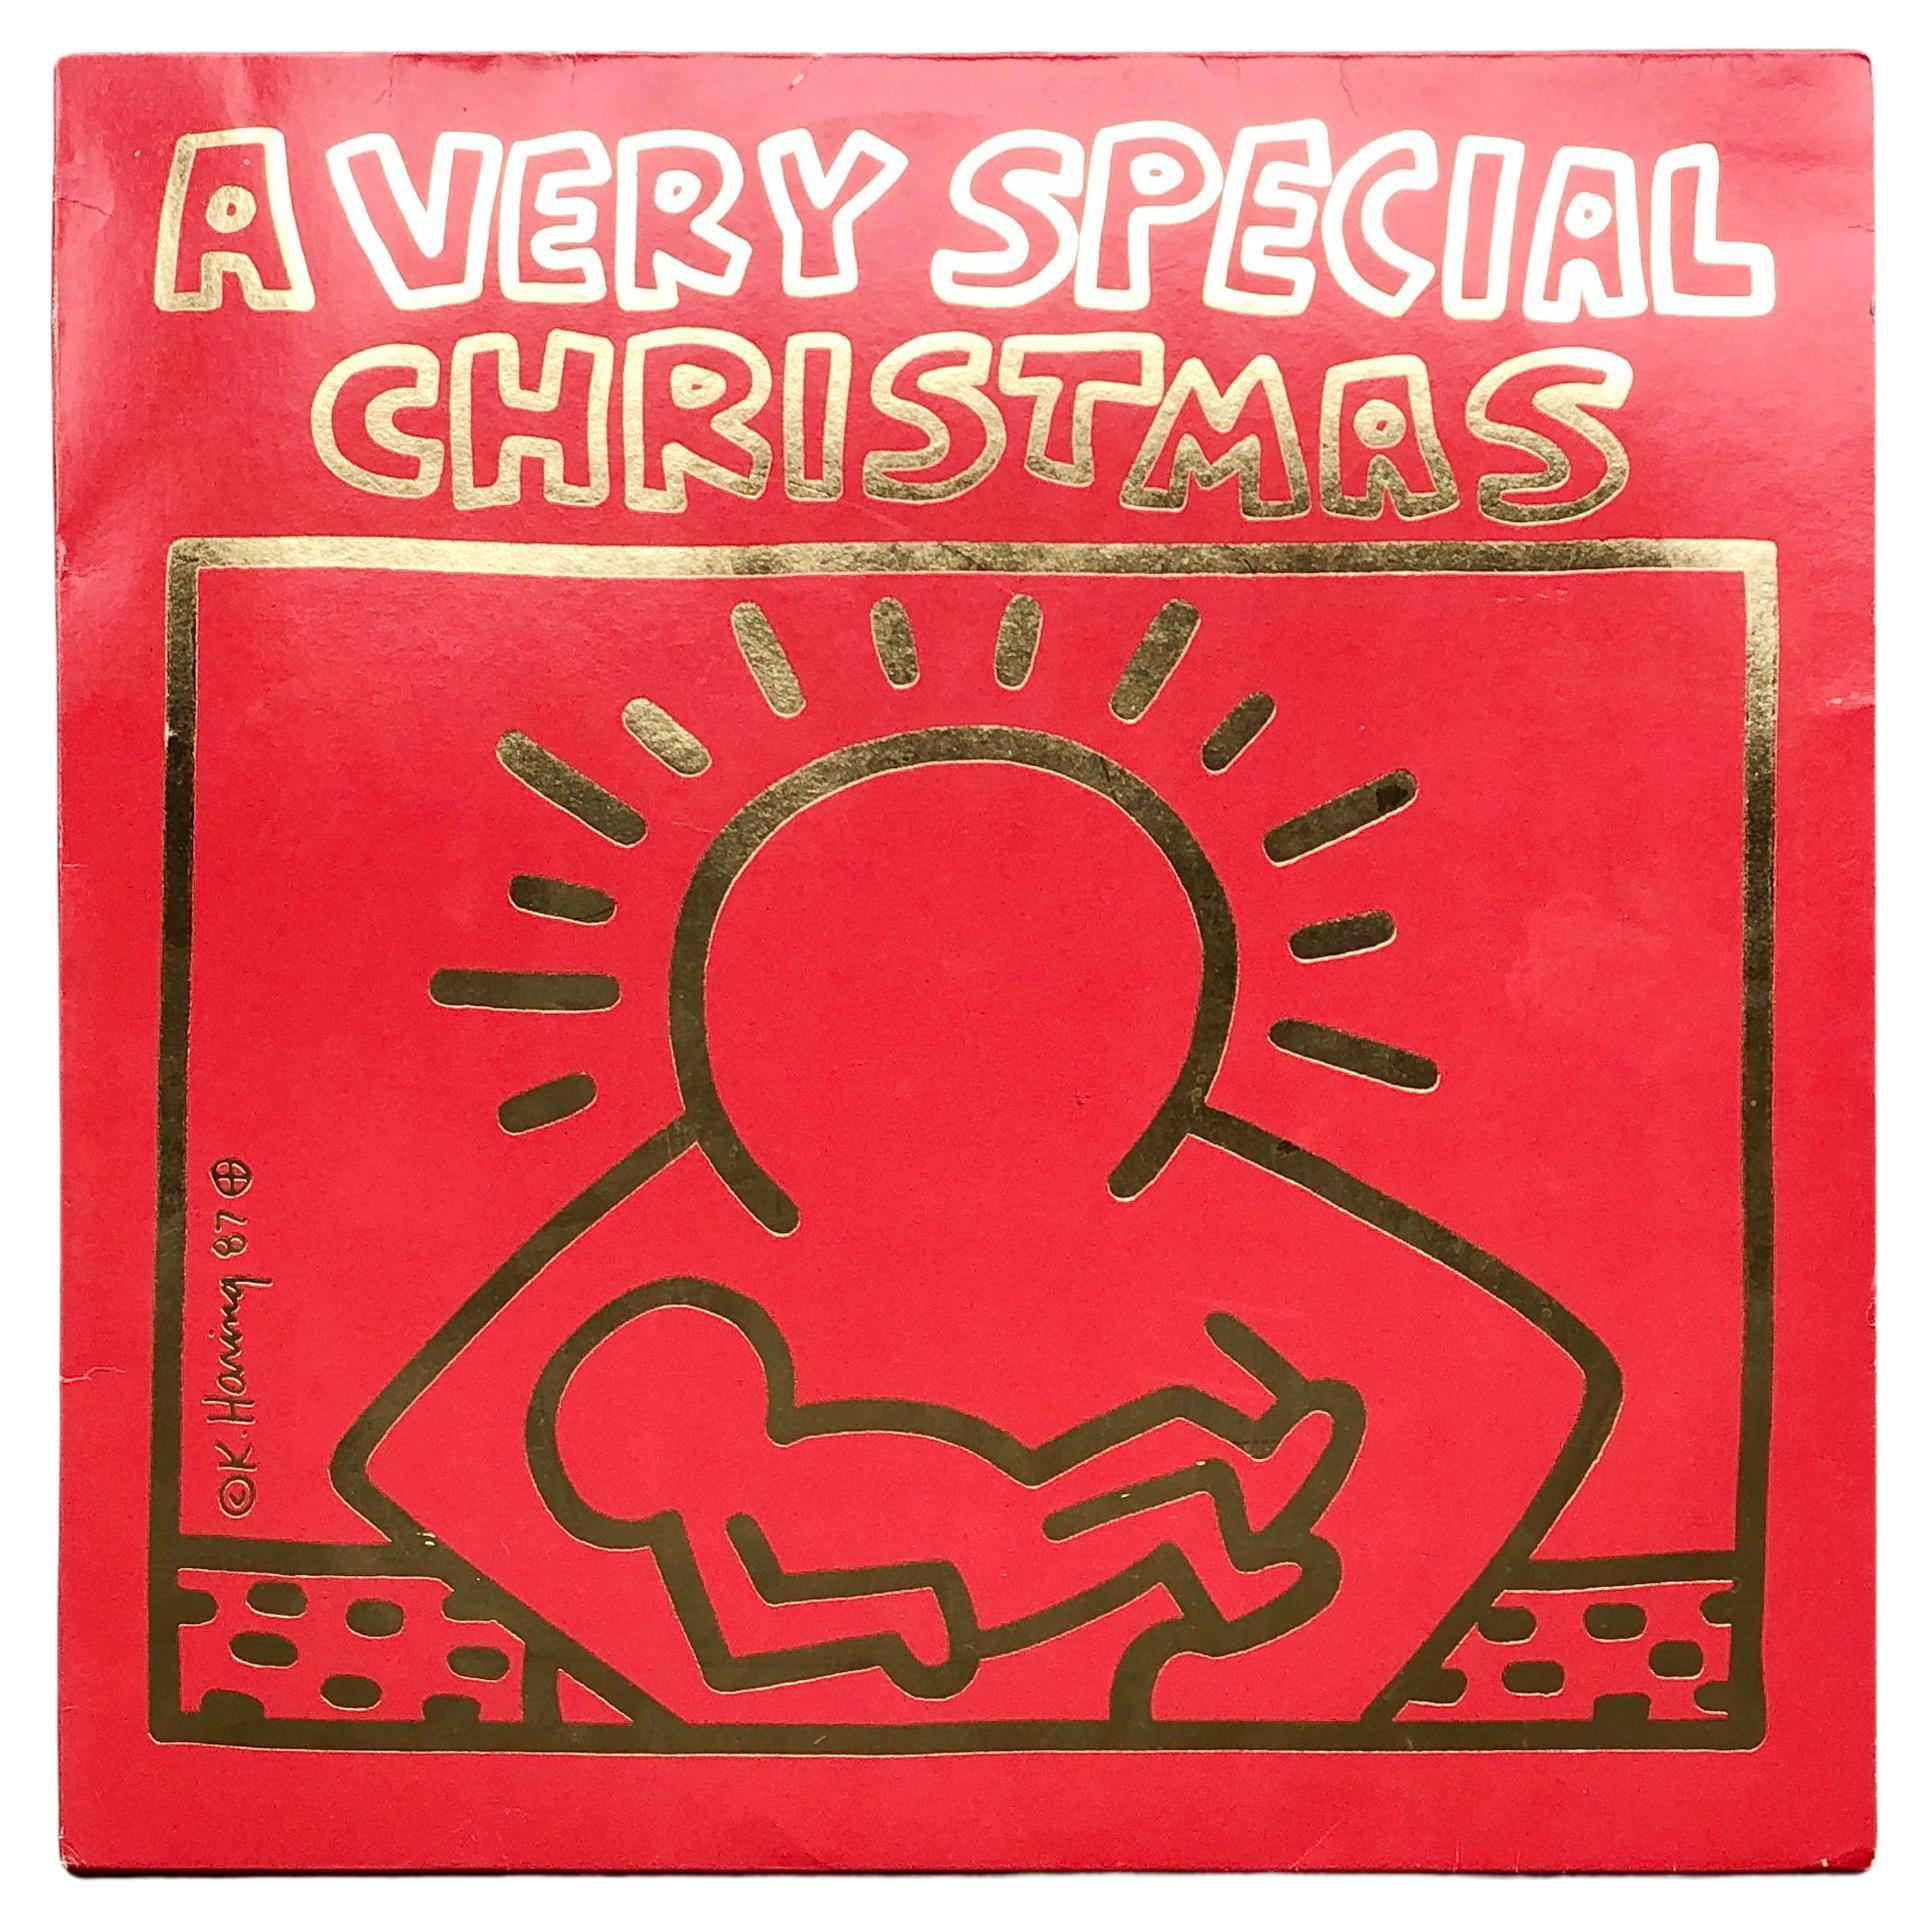 A Very Special Christmas Original 1987 first pressing Vinyl Record  For Sale